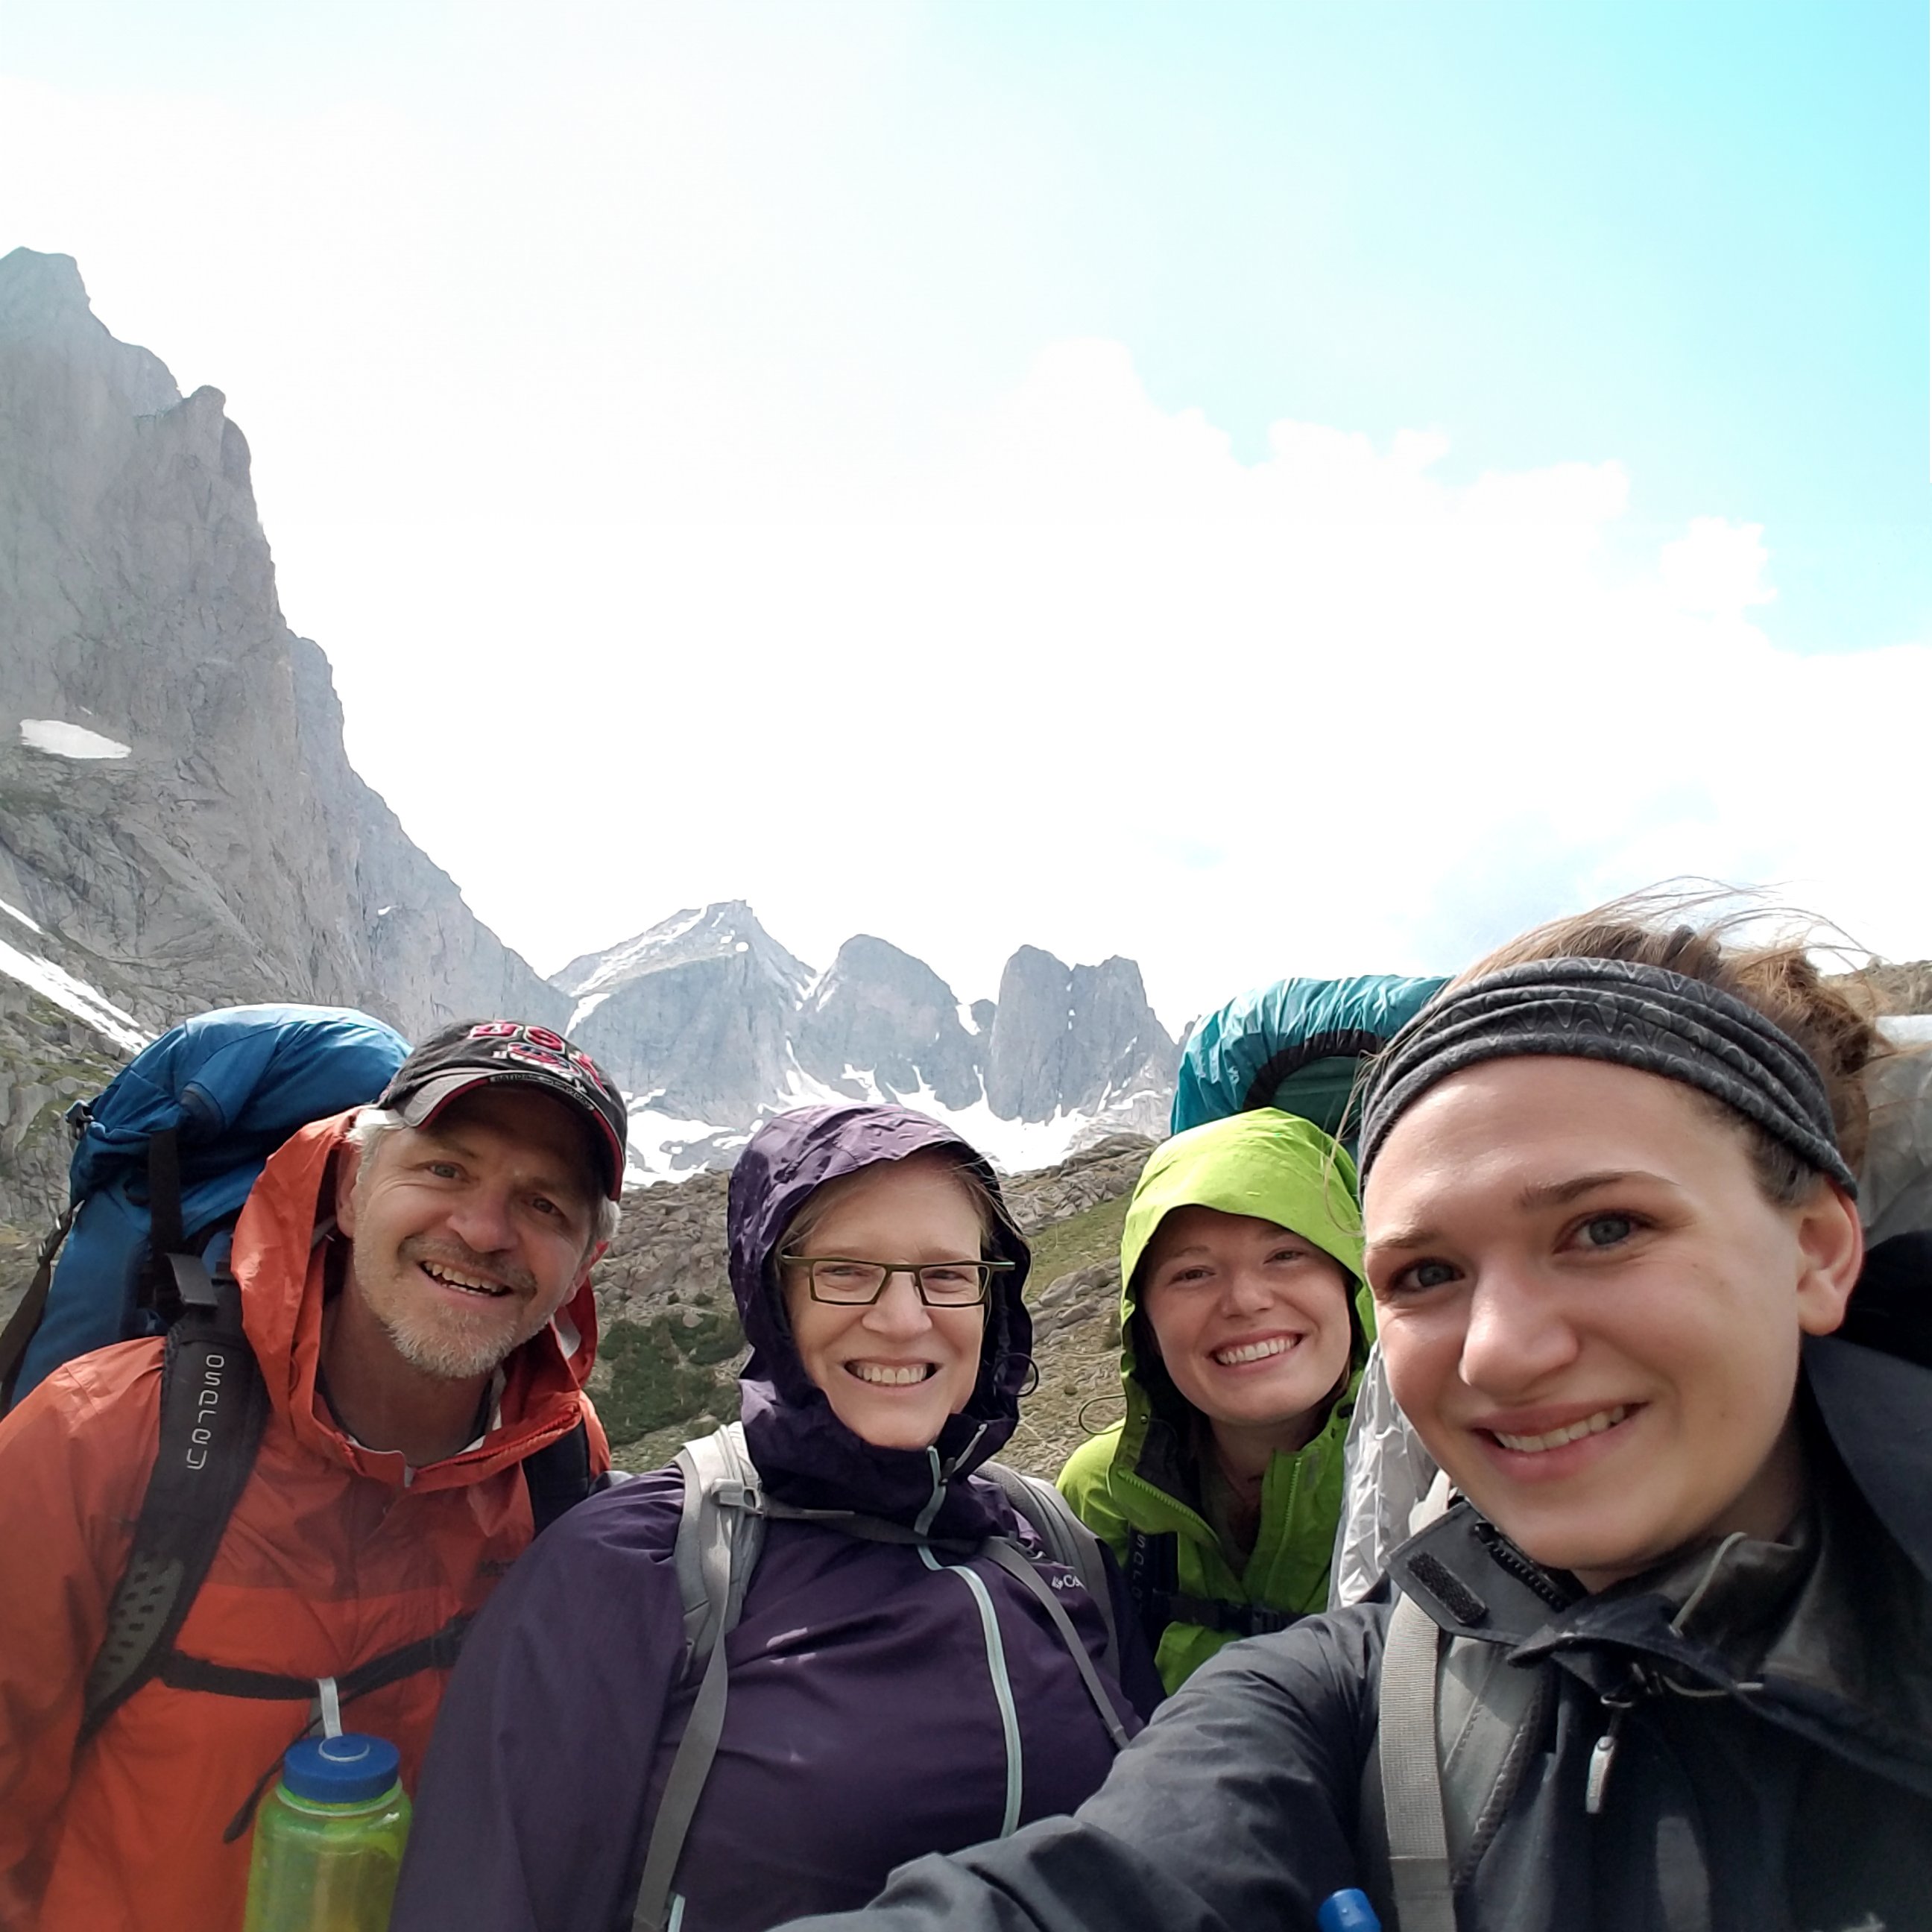 Tom Albin and his family at backpacking at Cirque of the Towers, Wind River, Wyoming